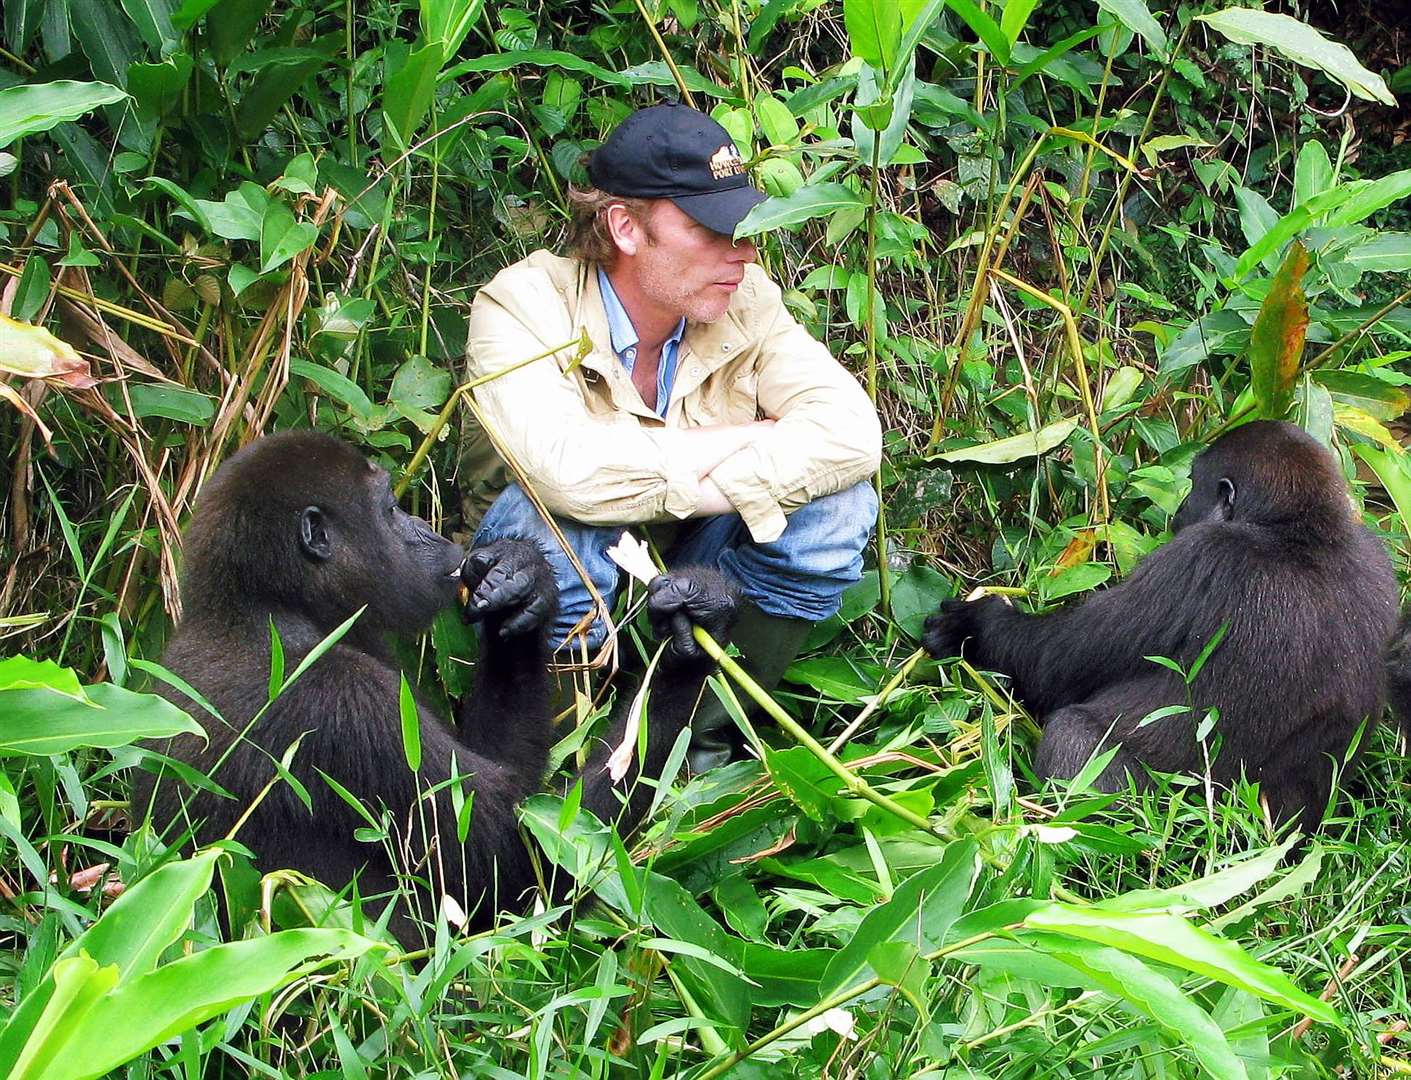 Damian Aspinall, pictured in 2010, with gorillas rewilded in Gabon